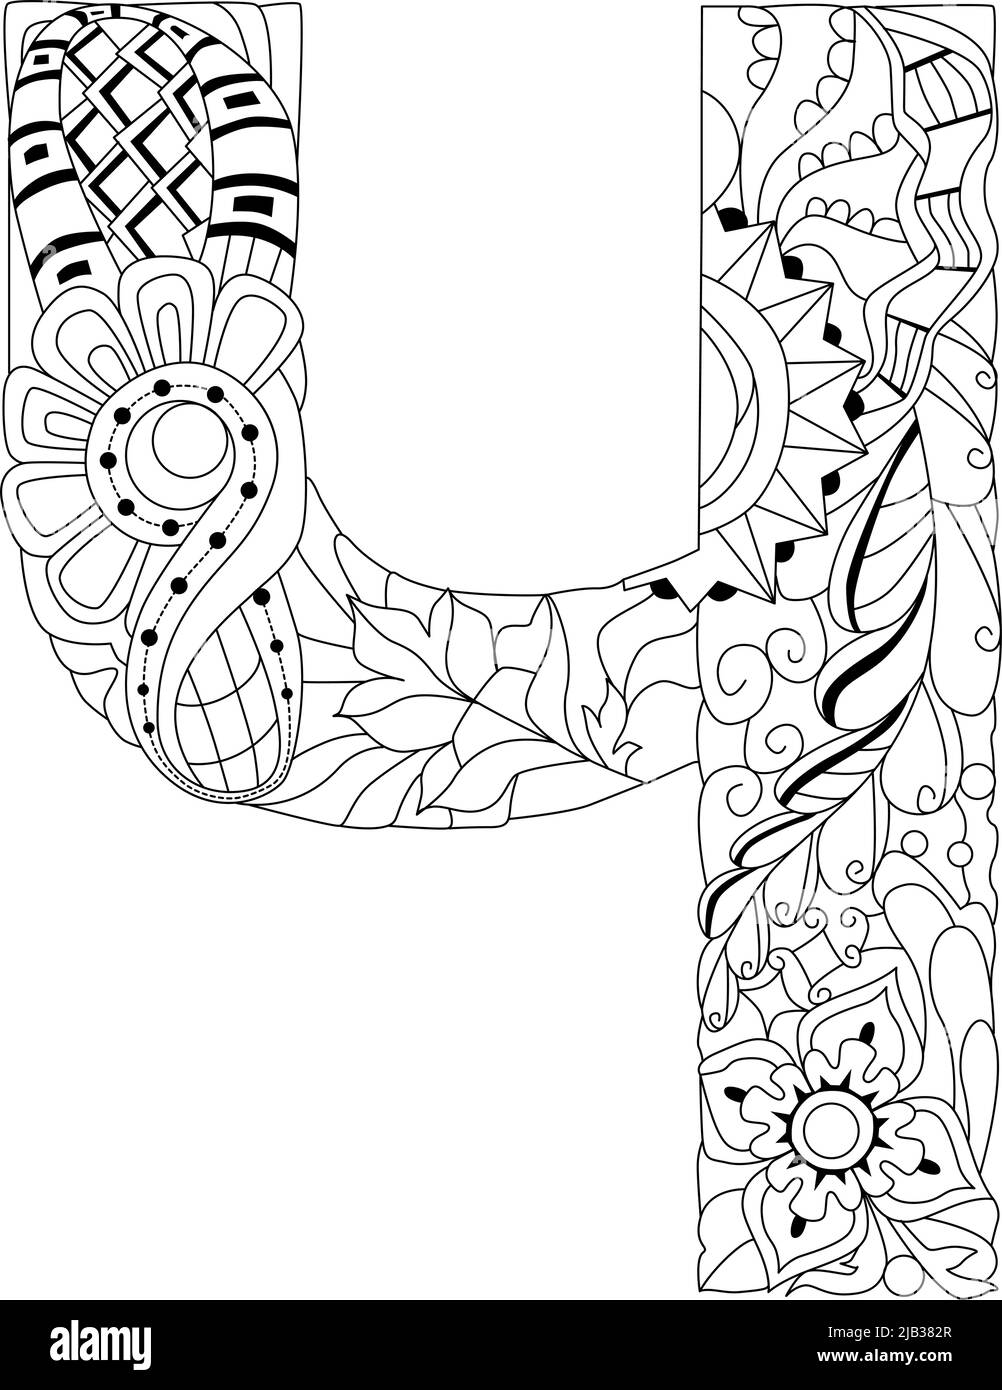 Russian Alphabet Cyrillic Capital. Vector illustration for coloring Stock Vector